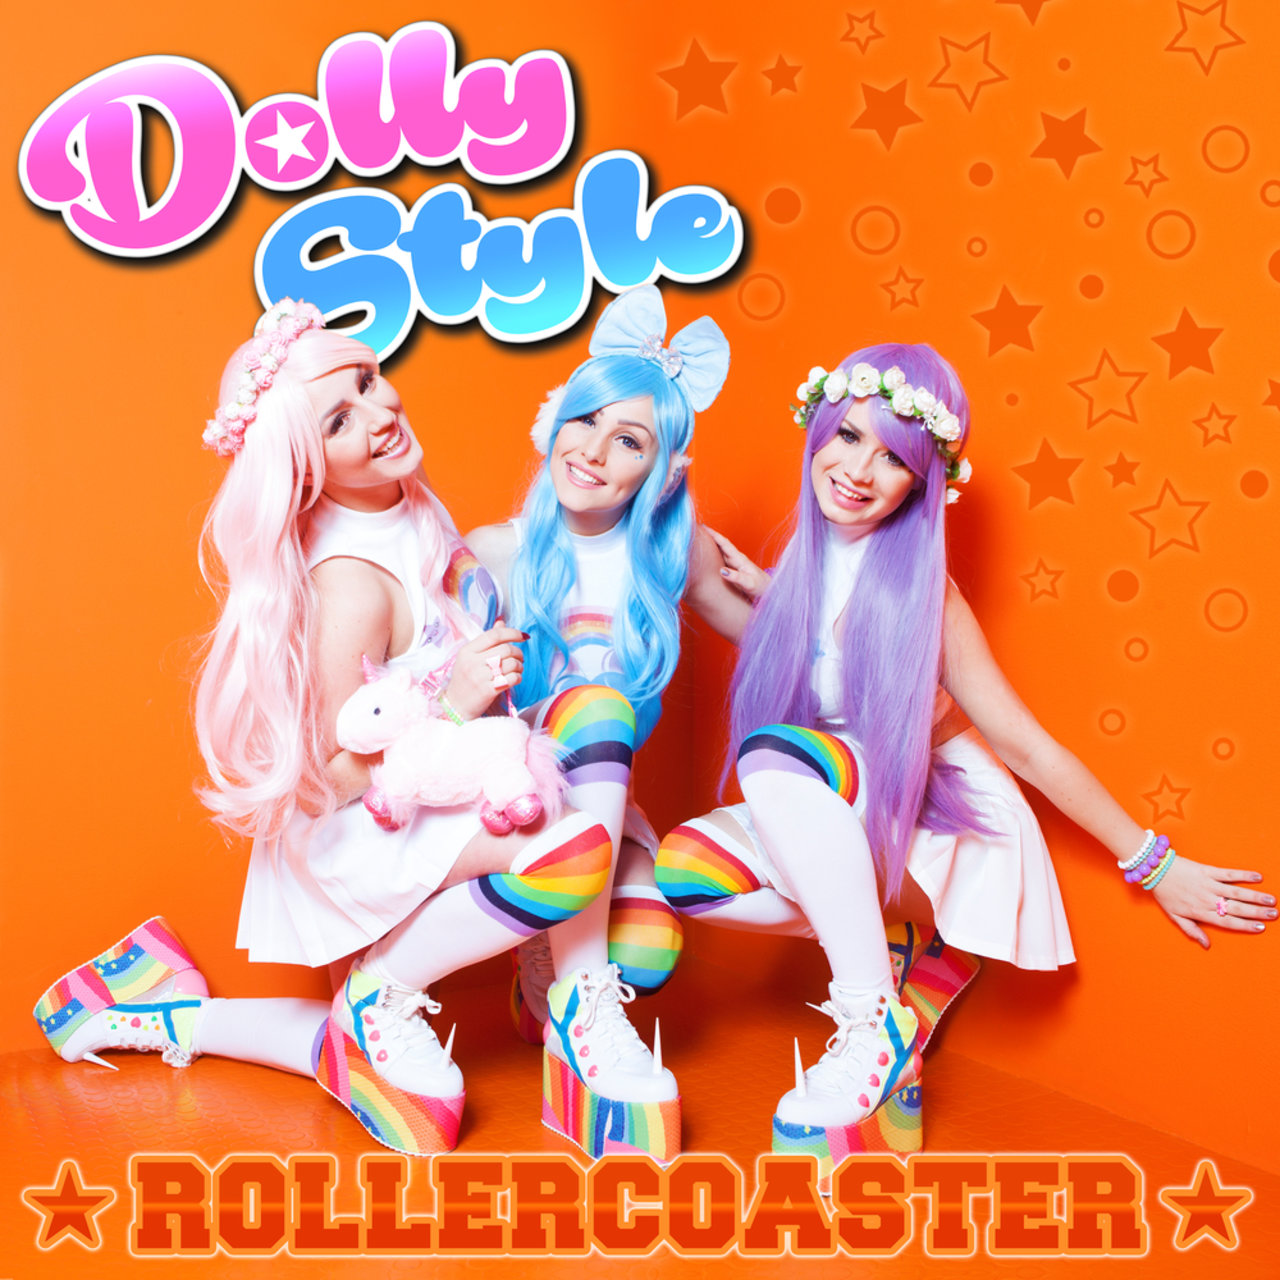 Dolly Style Rollercoaster cover artwork